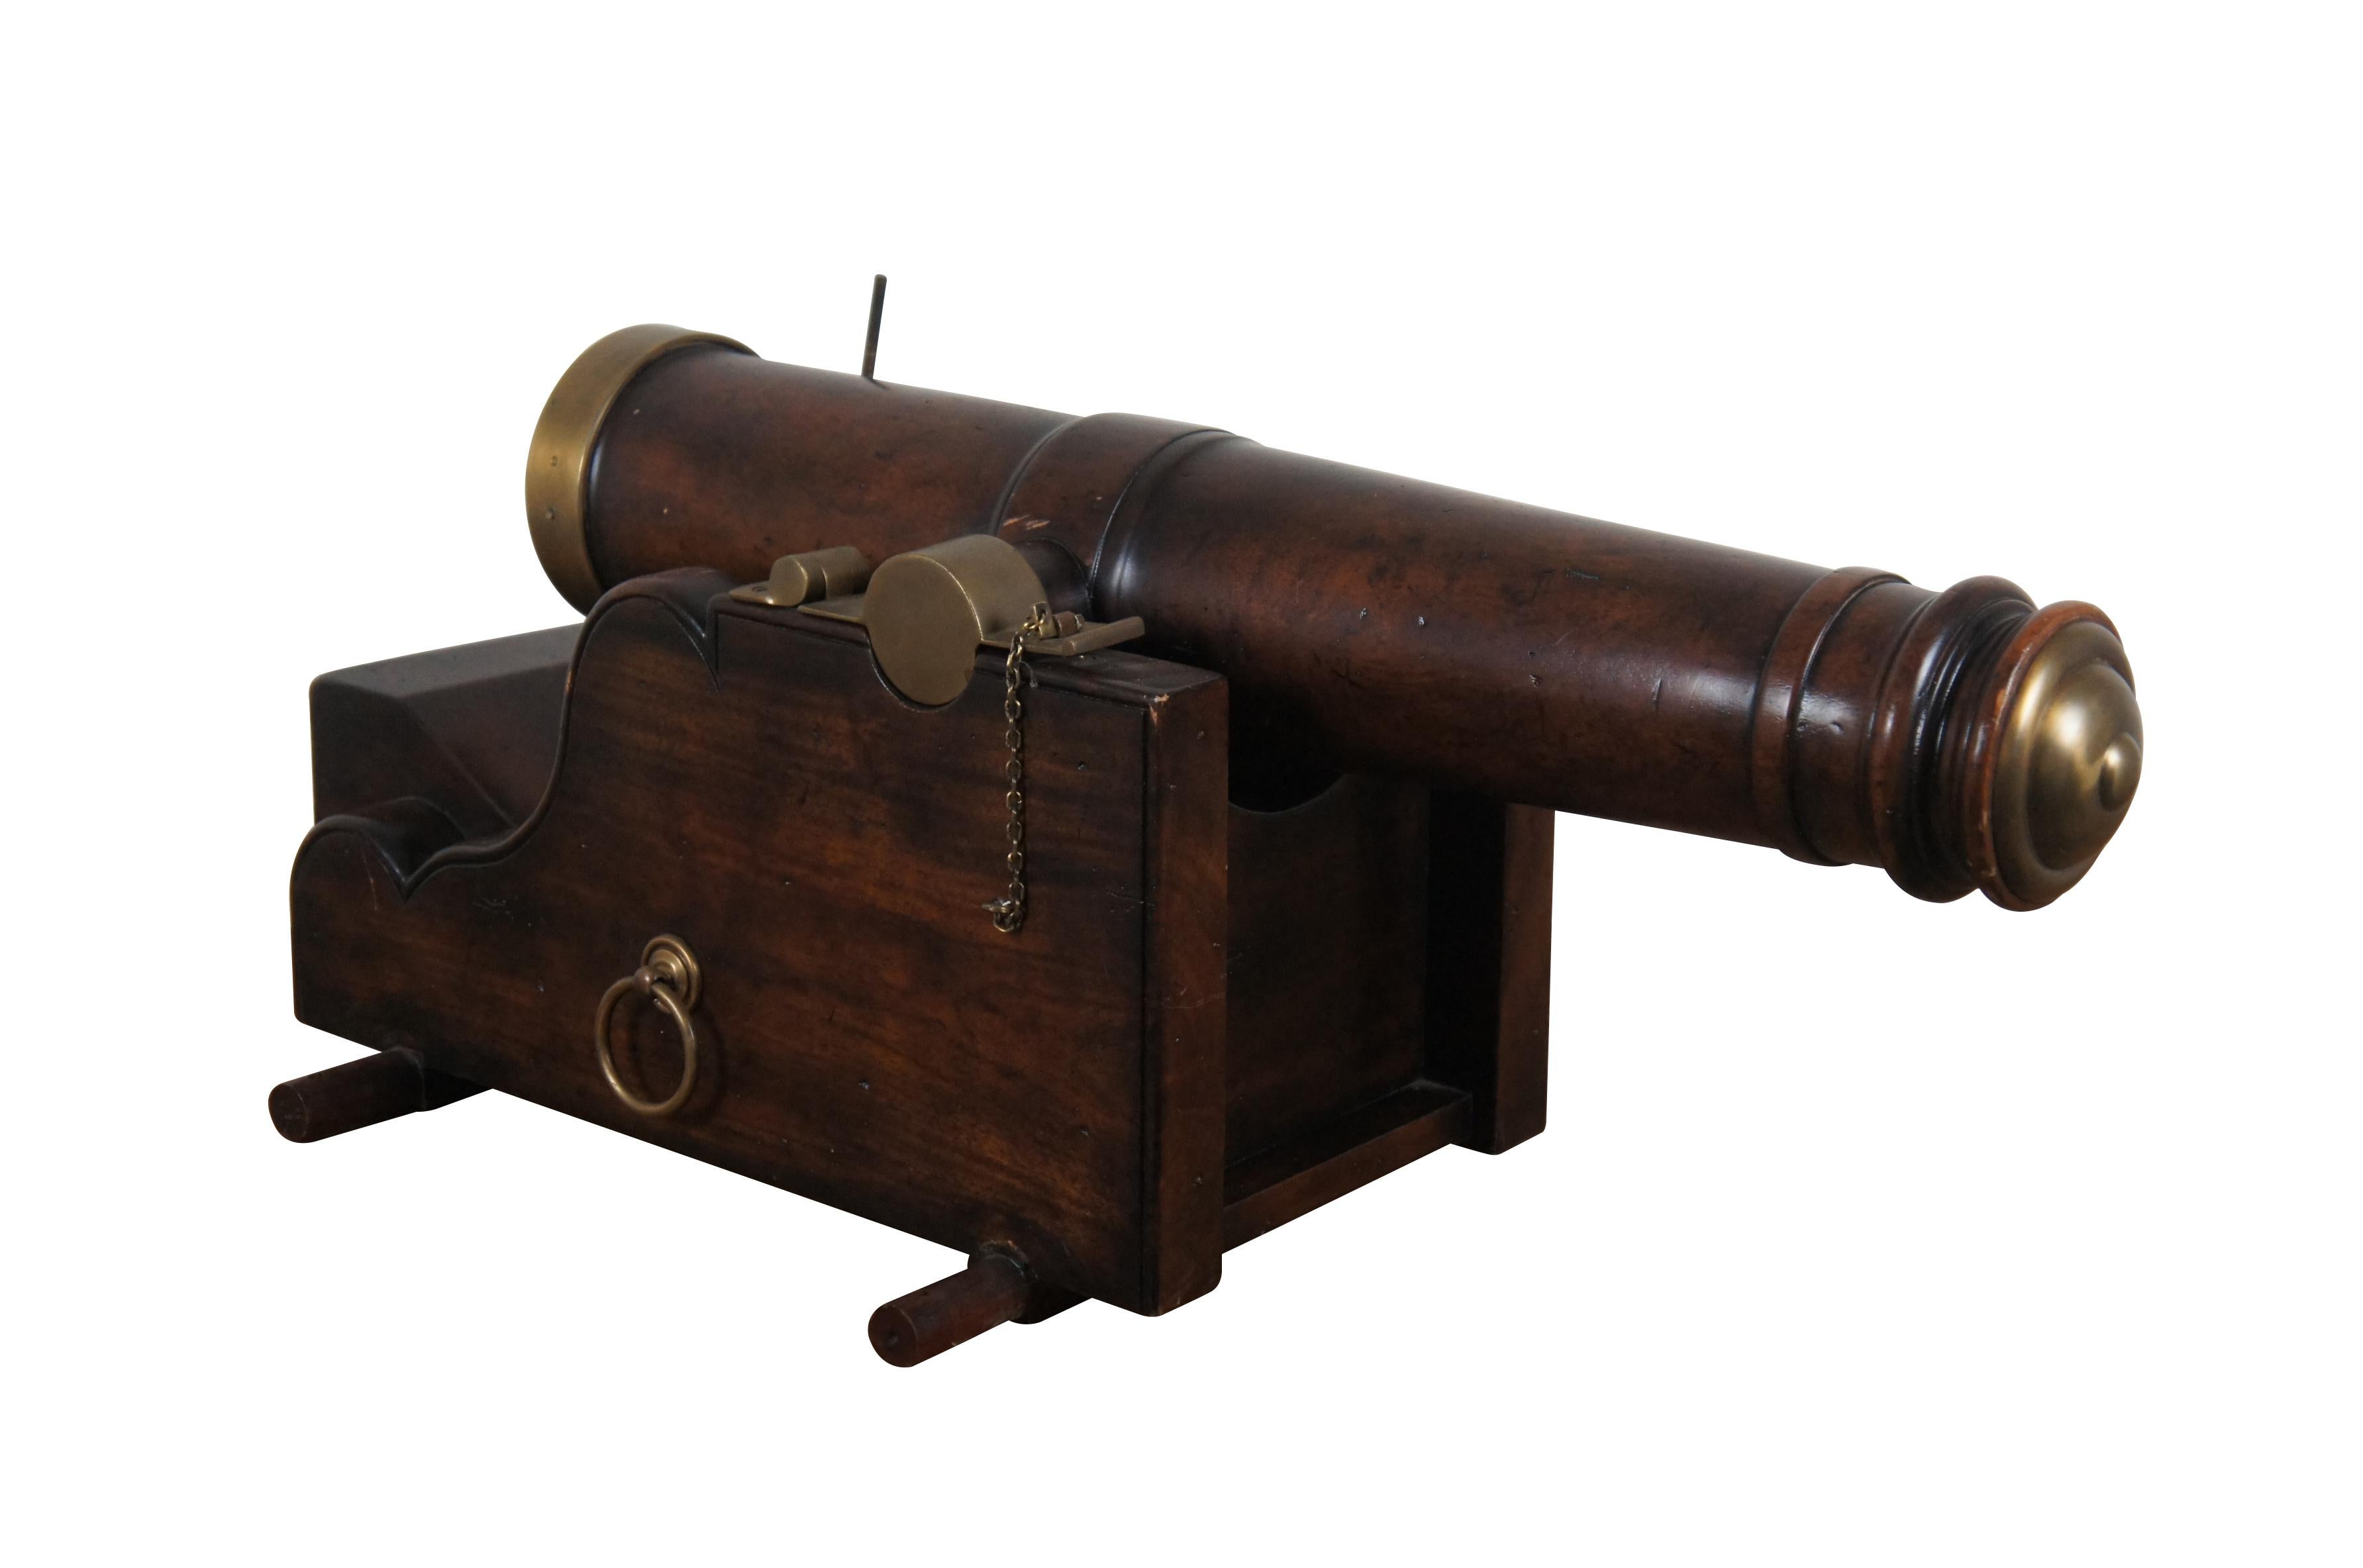 Large mahogany reprodution Nautical Maritime Naval cannon and base with brass accents, by Luxury Furniture, SE10109.

Dimensions:
30